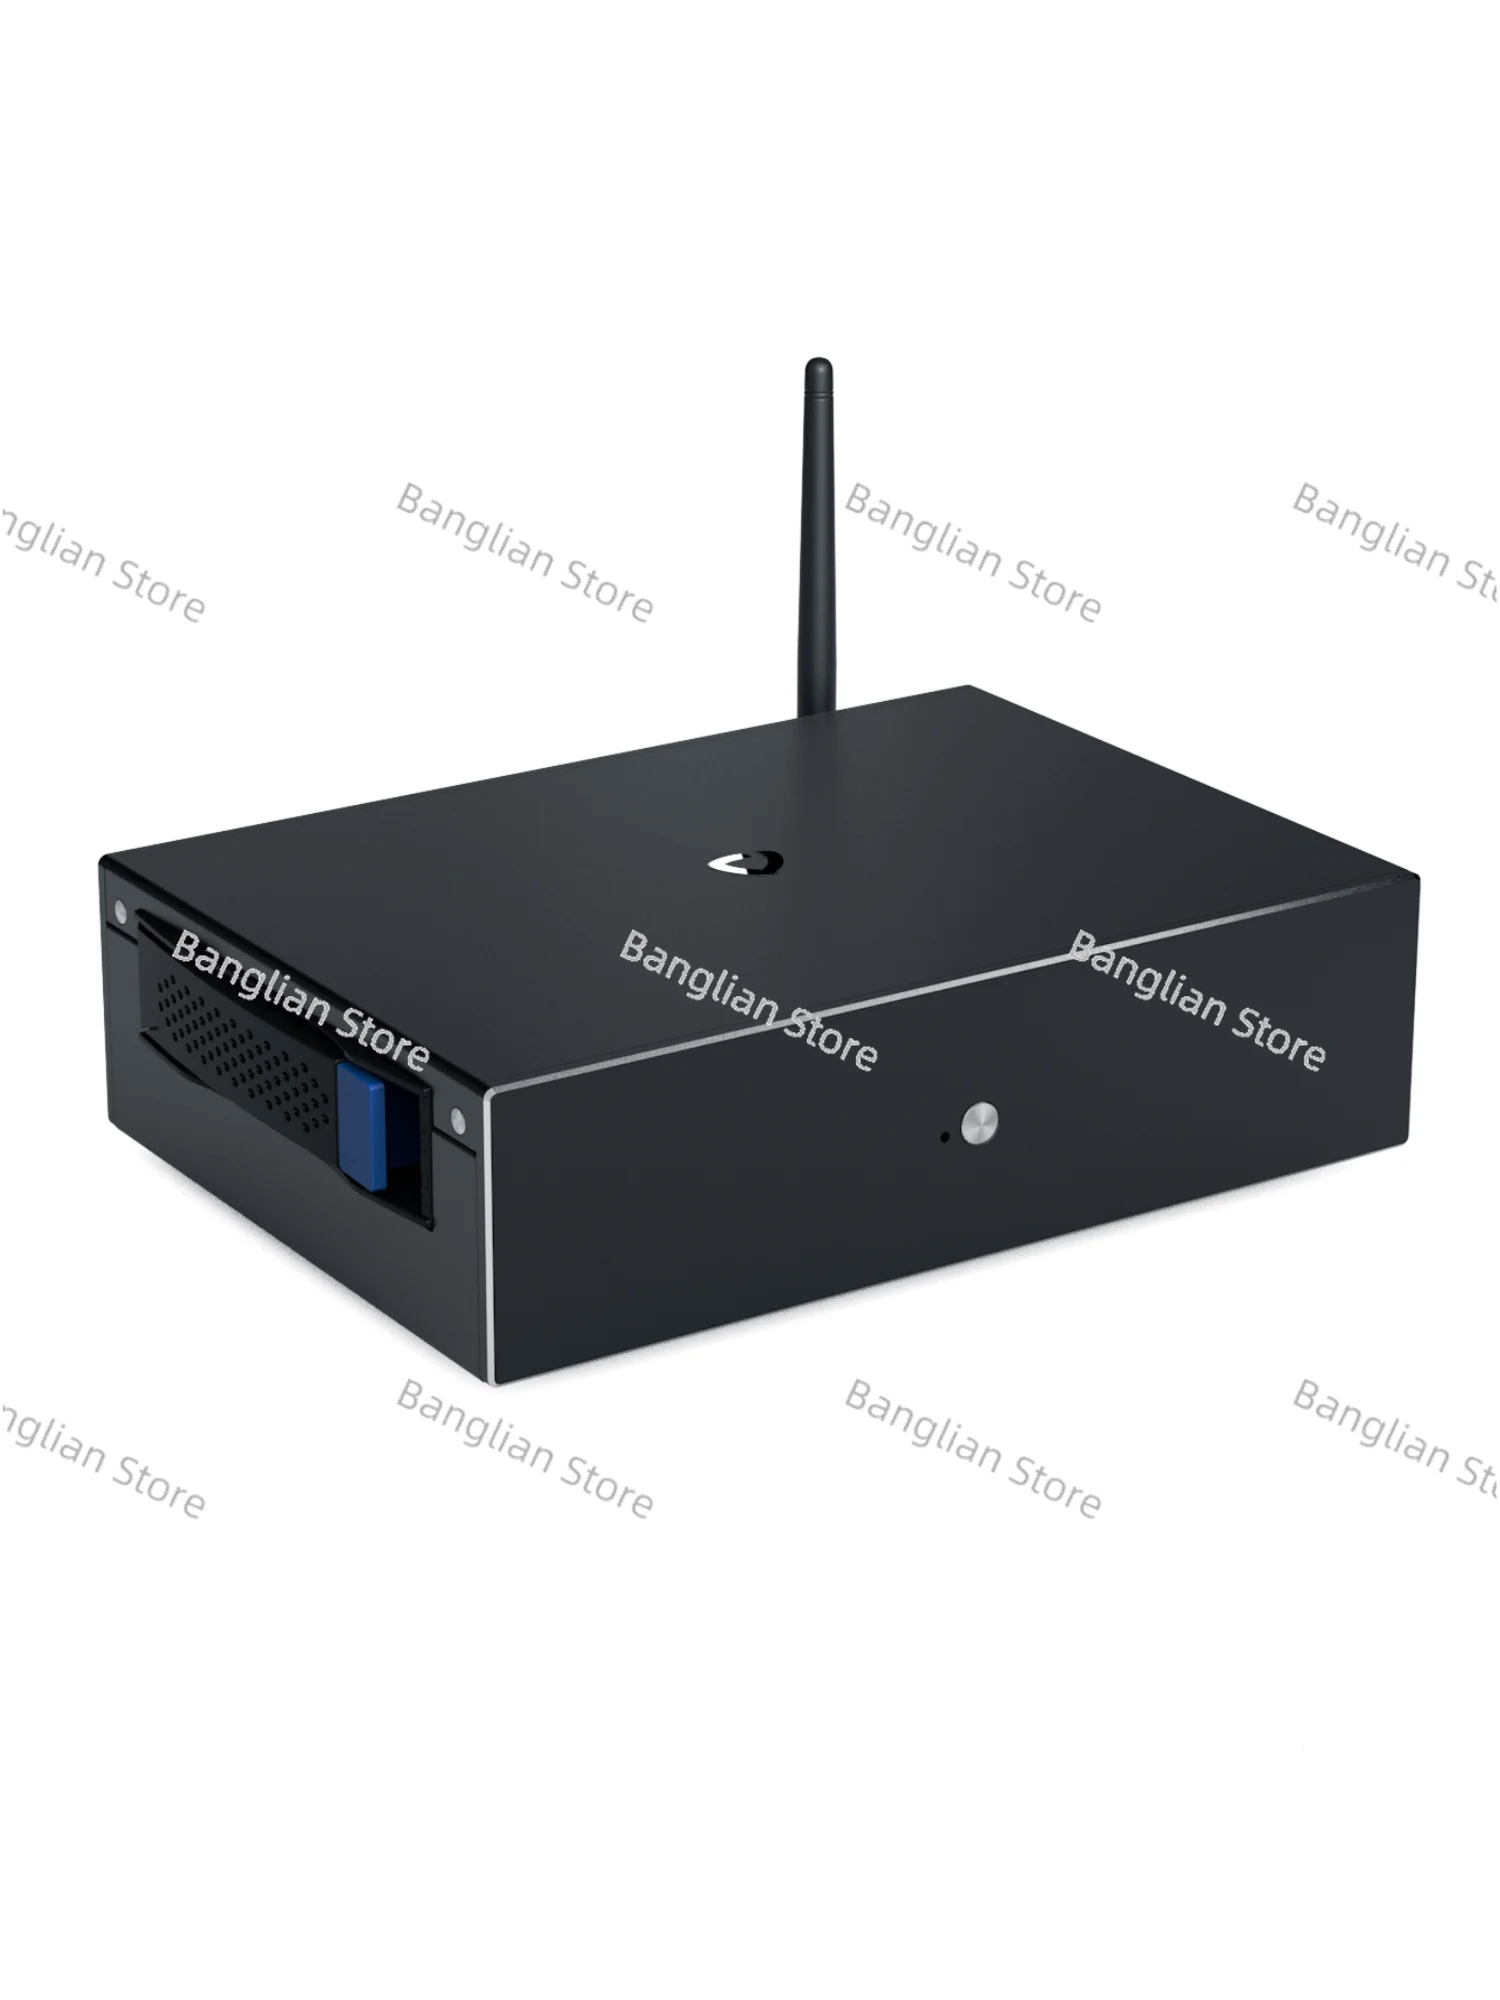 

Personal Cloud Storage, NAS Network Automatic Backup, Local Area Network Remote Sharing, Home WIFI Hard Drive Enclosure